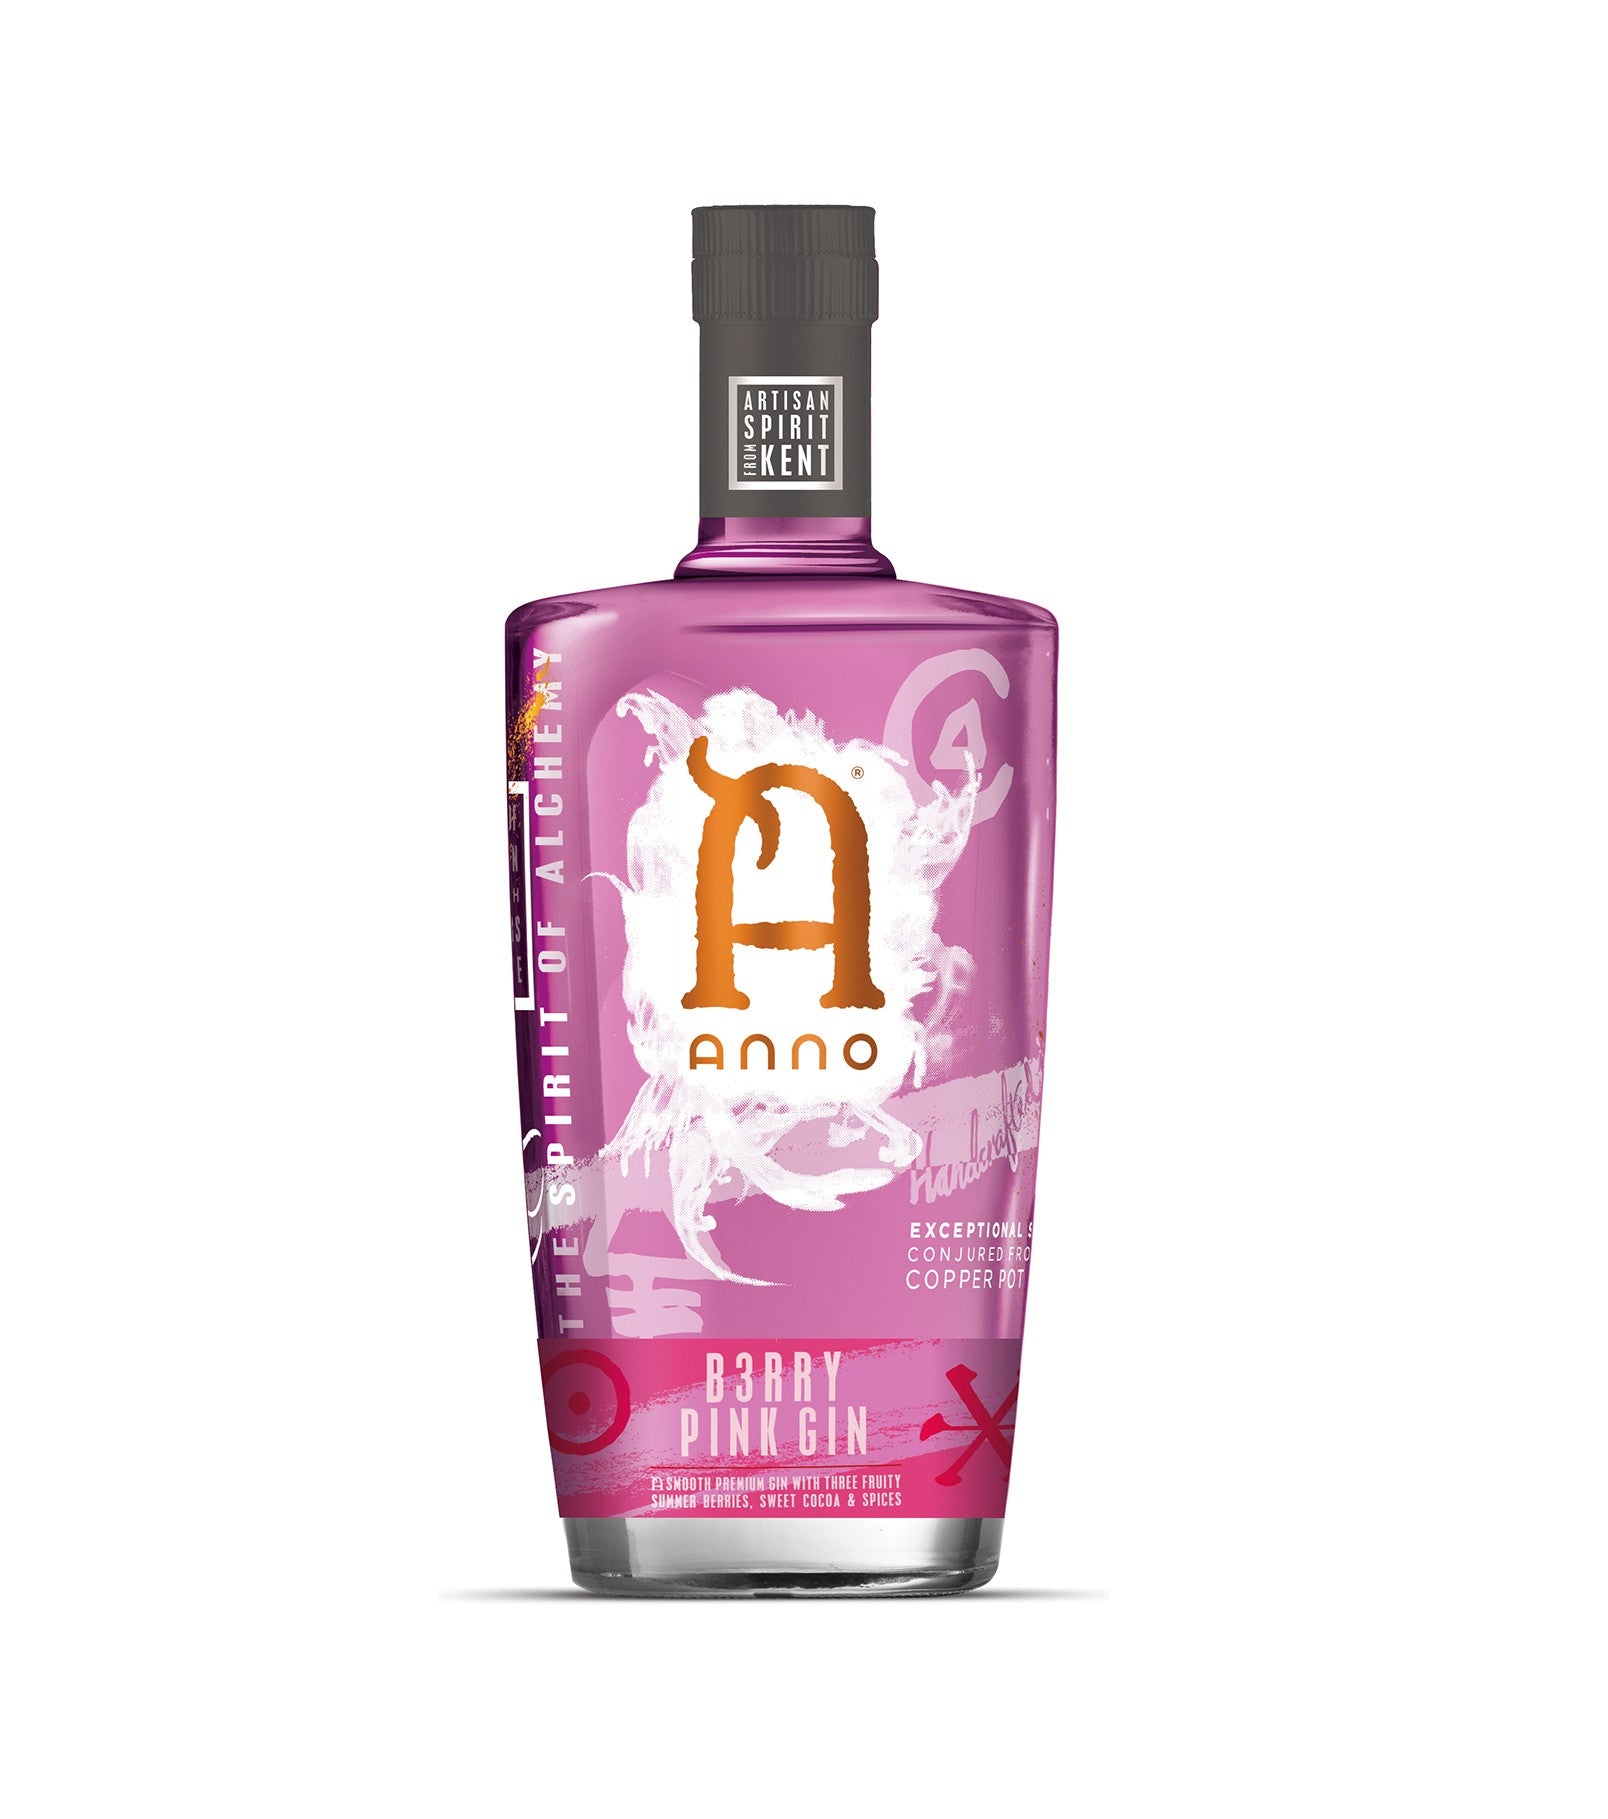 Anno B3RRY Pink Gin